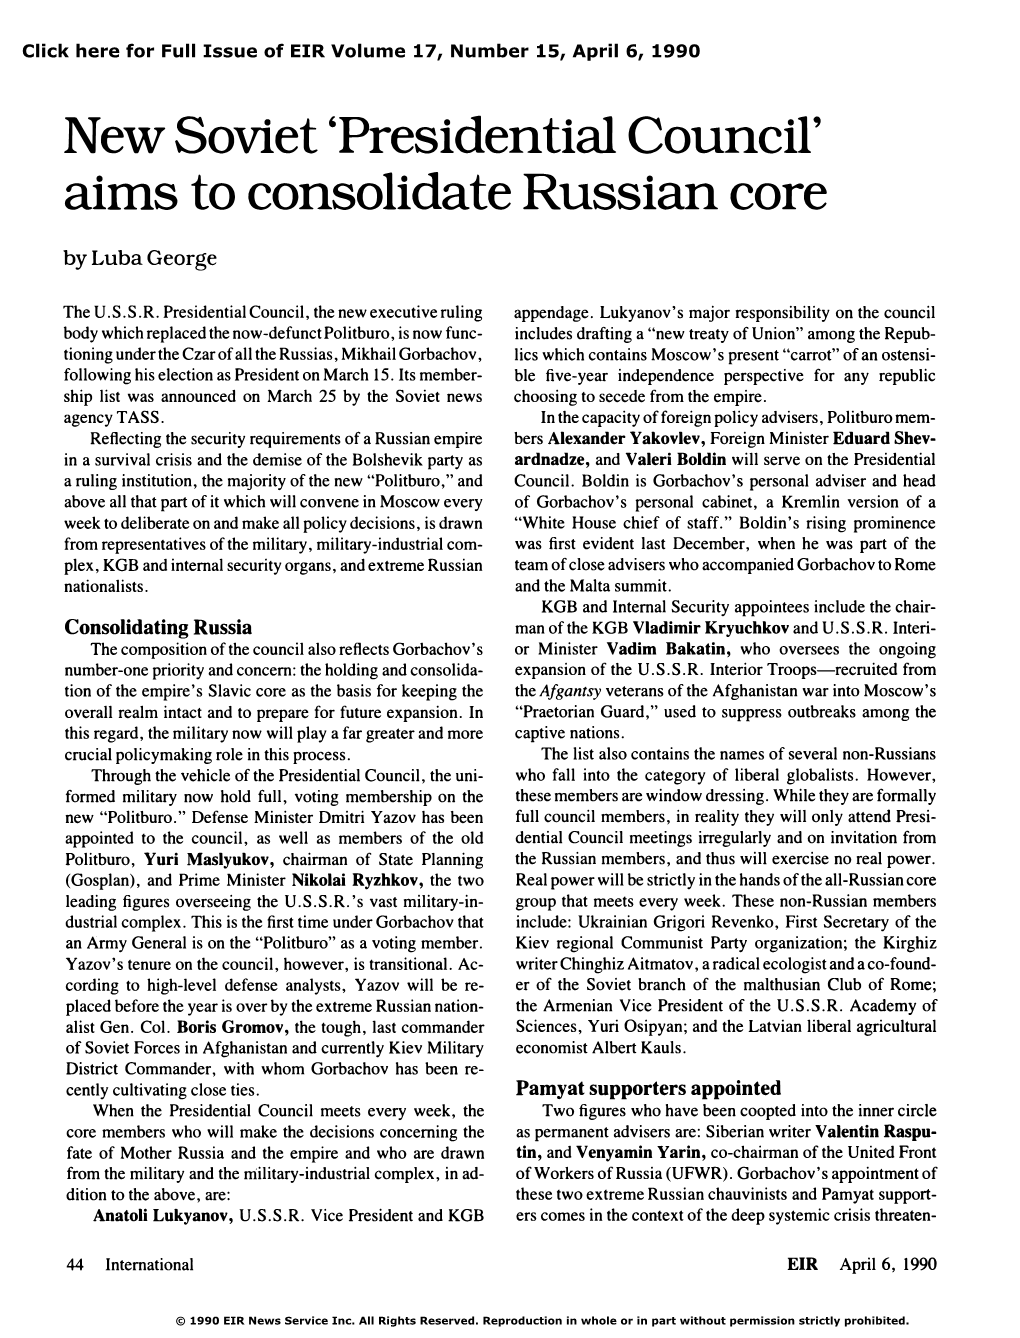 New Soviet 'Presidential Council' Aims to Consolidate Russian Core